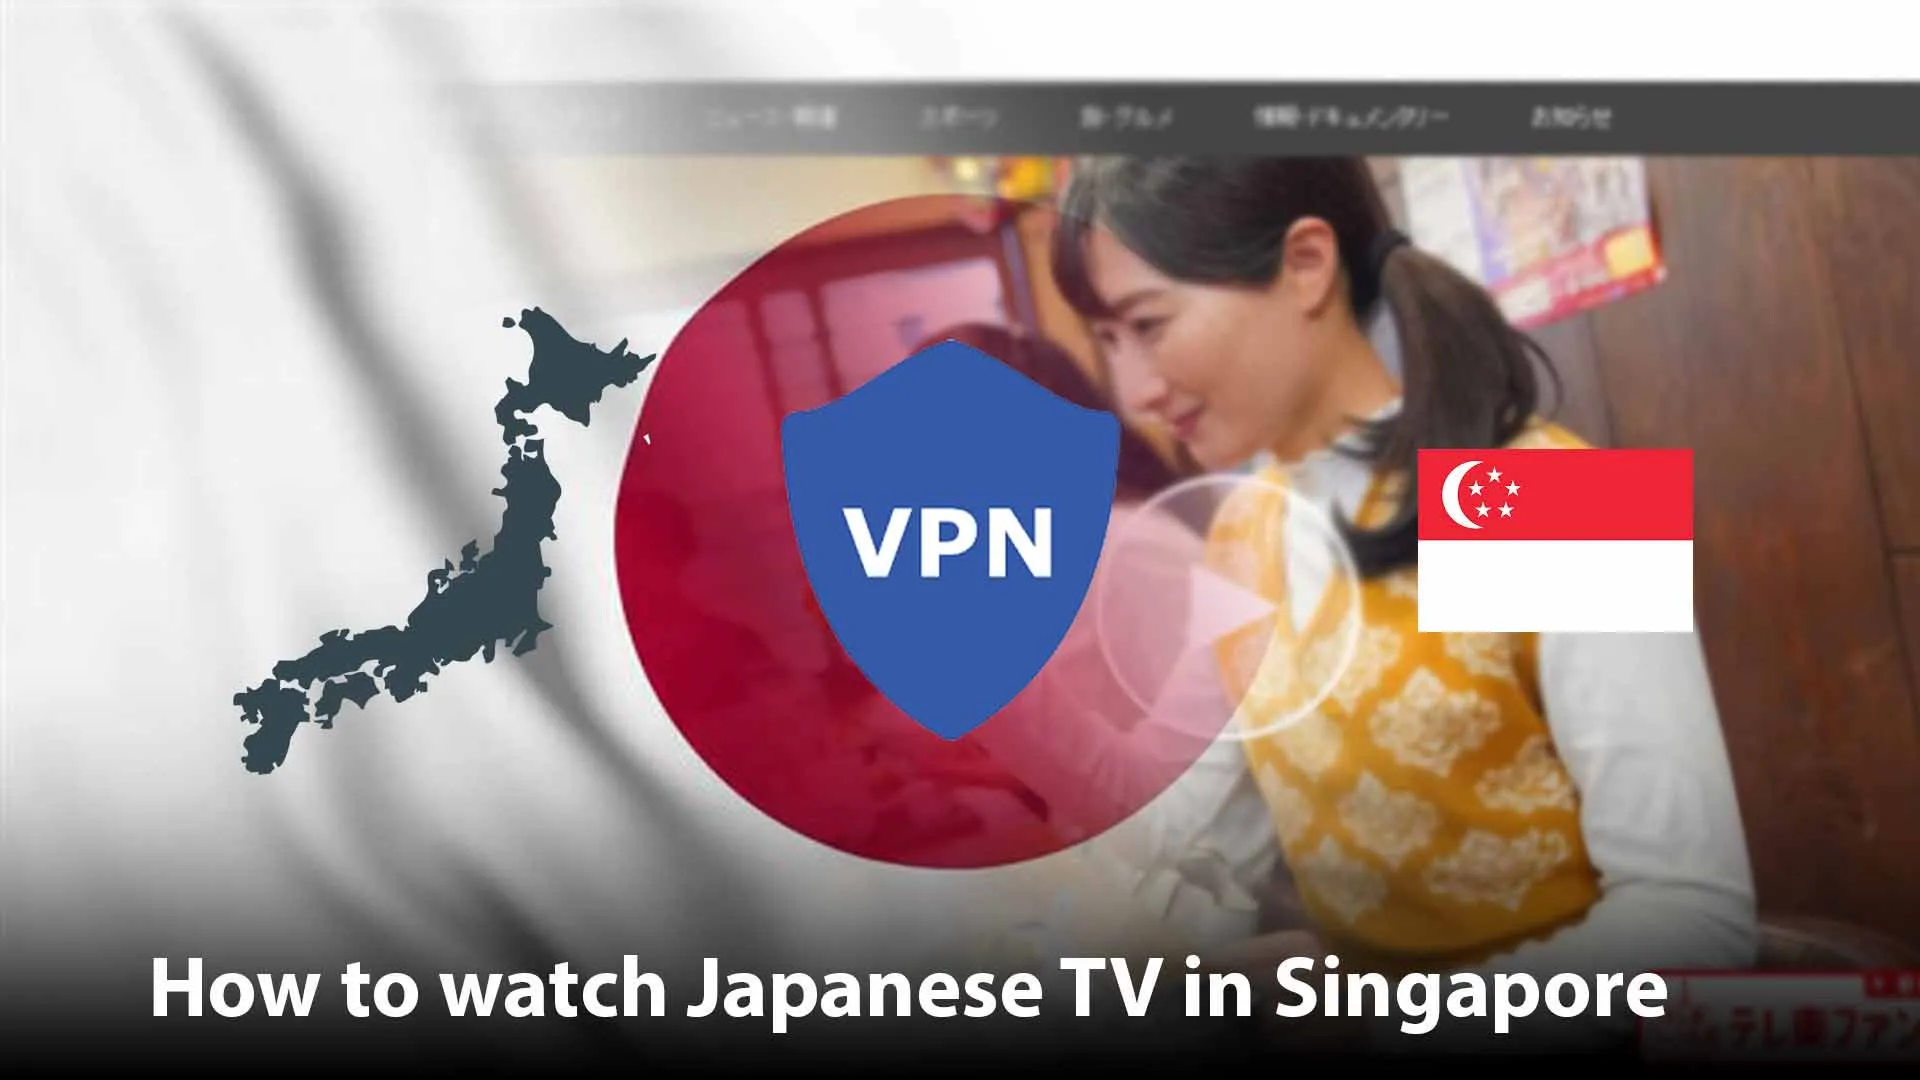 How to watch Japanese TV in Singapore